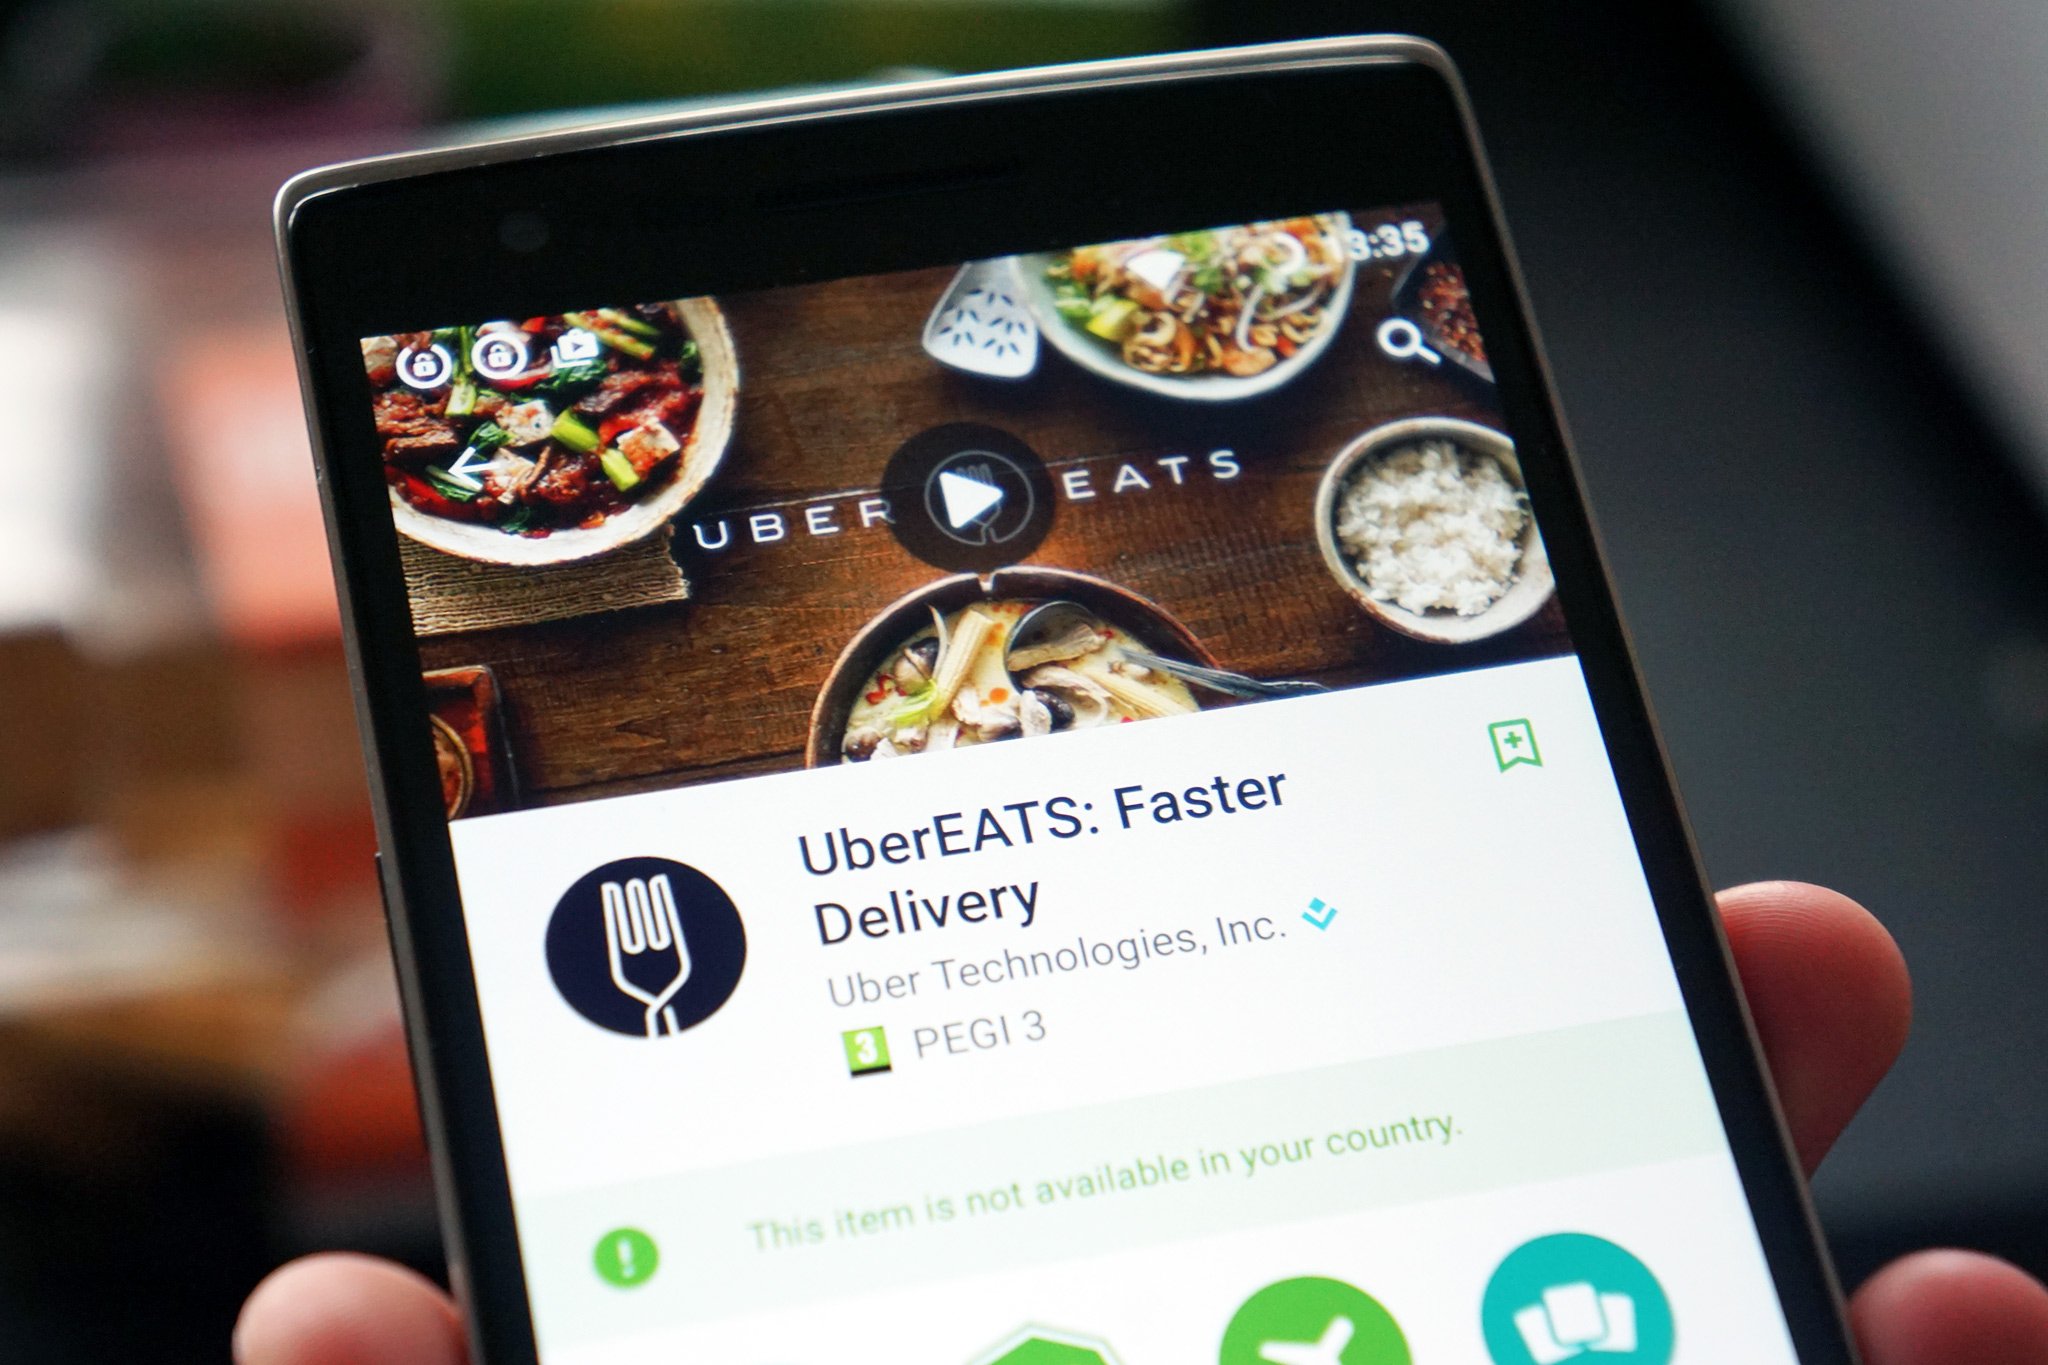 Uber will now deliver delicious food in 30 minutes across ...